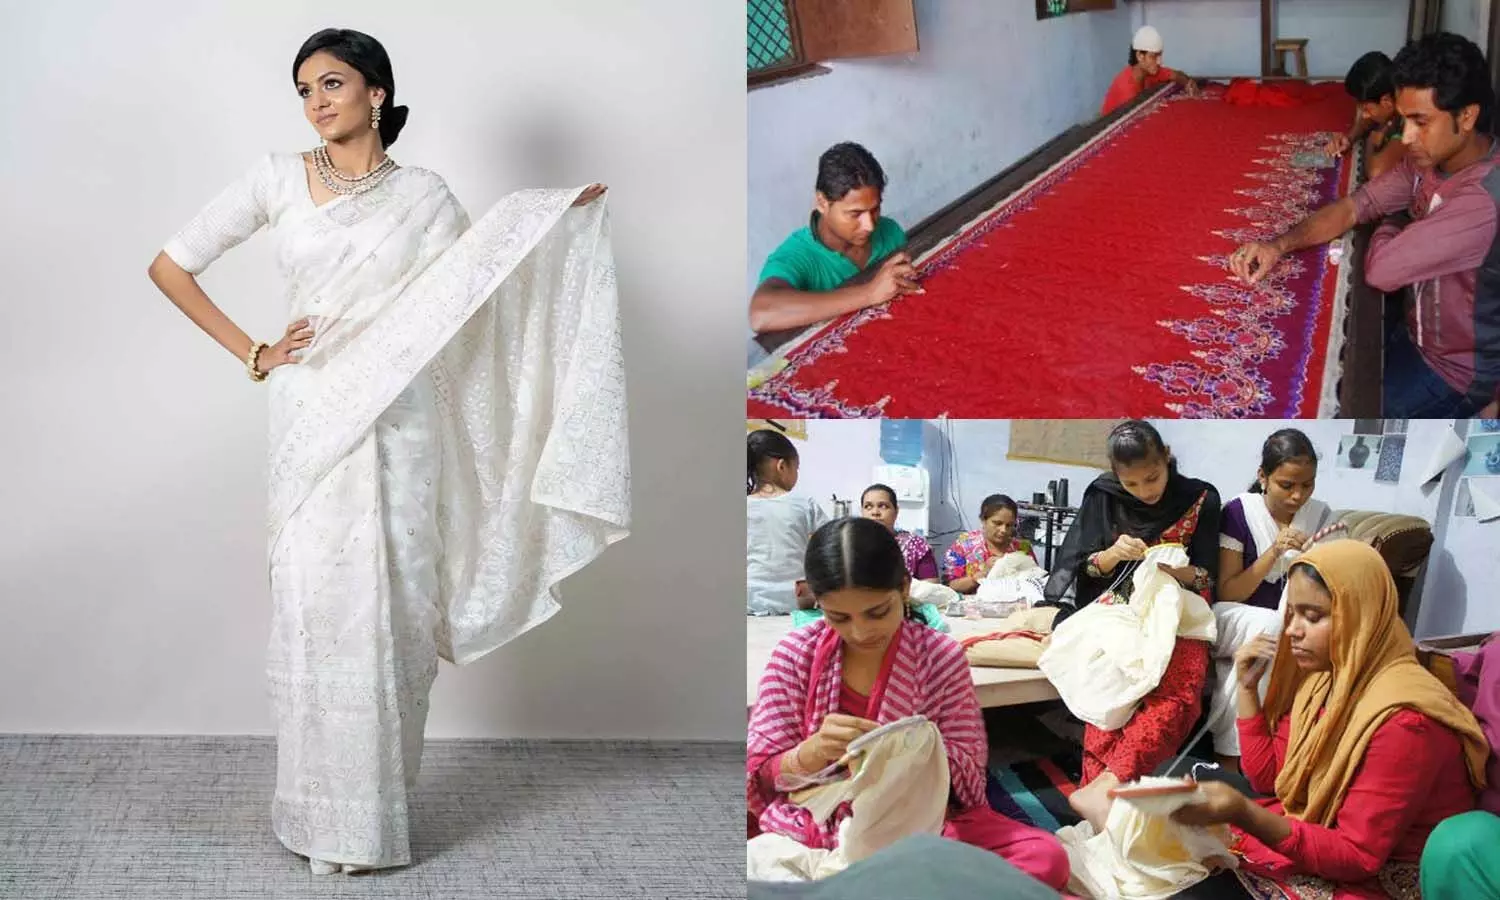 The life of the artisans of Lucknowi Chikankari and Zardozi is very bad.